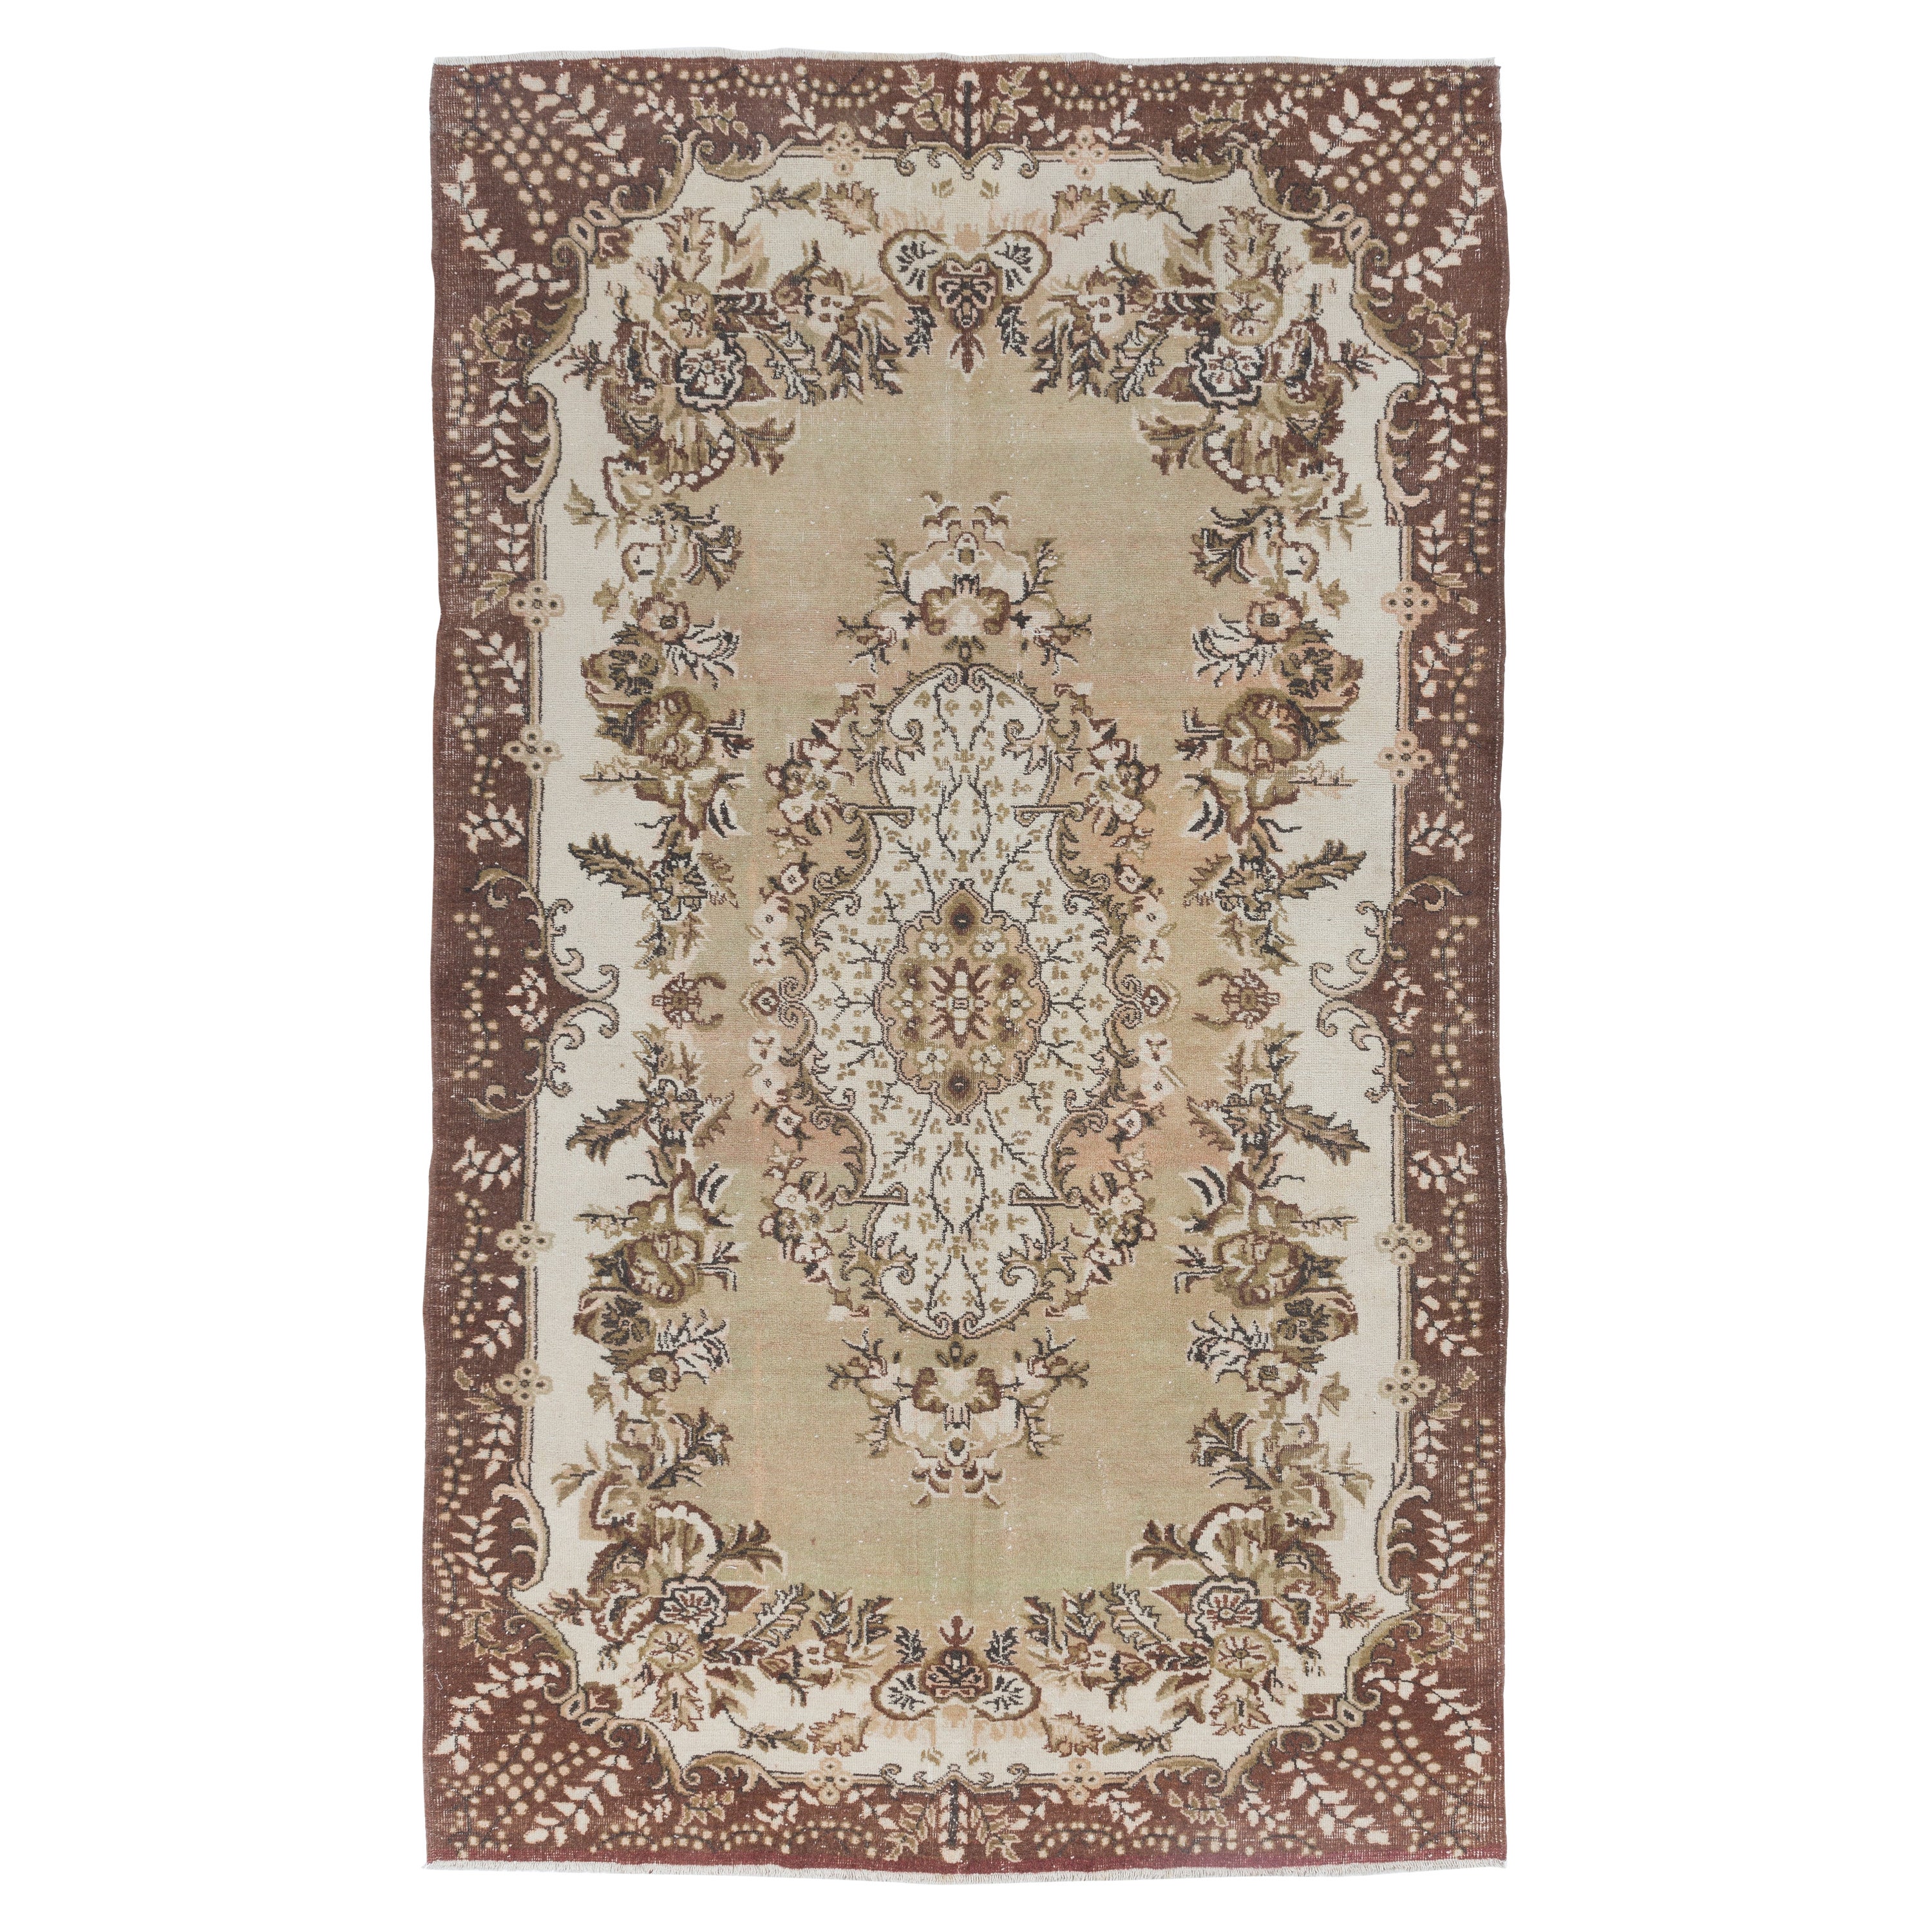 6.8x11.5 Ft Fine HandKnotted Vintage Turkish Wool Area Rug with Medallion Design For Sale